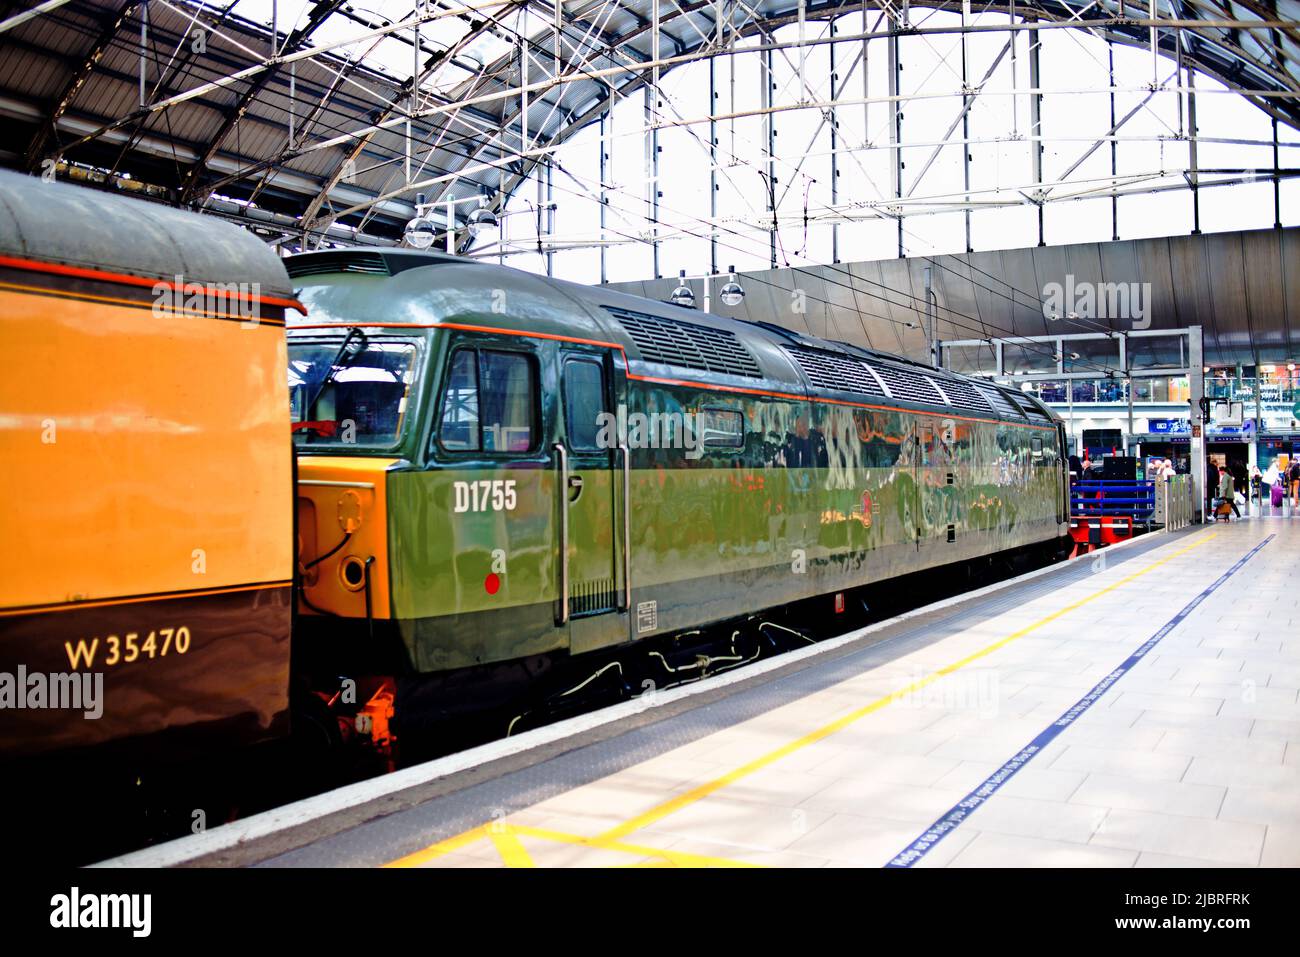 Brush Type 4 D 1755 Locomotive on Charter Train at Piccadilly Station, Manchester, England Stock Photo